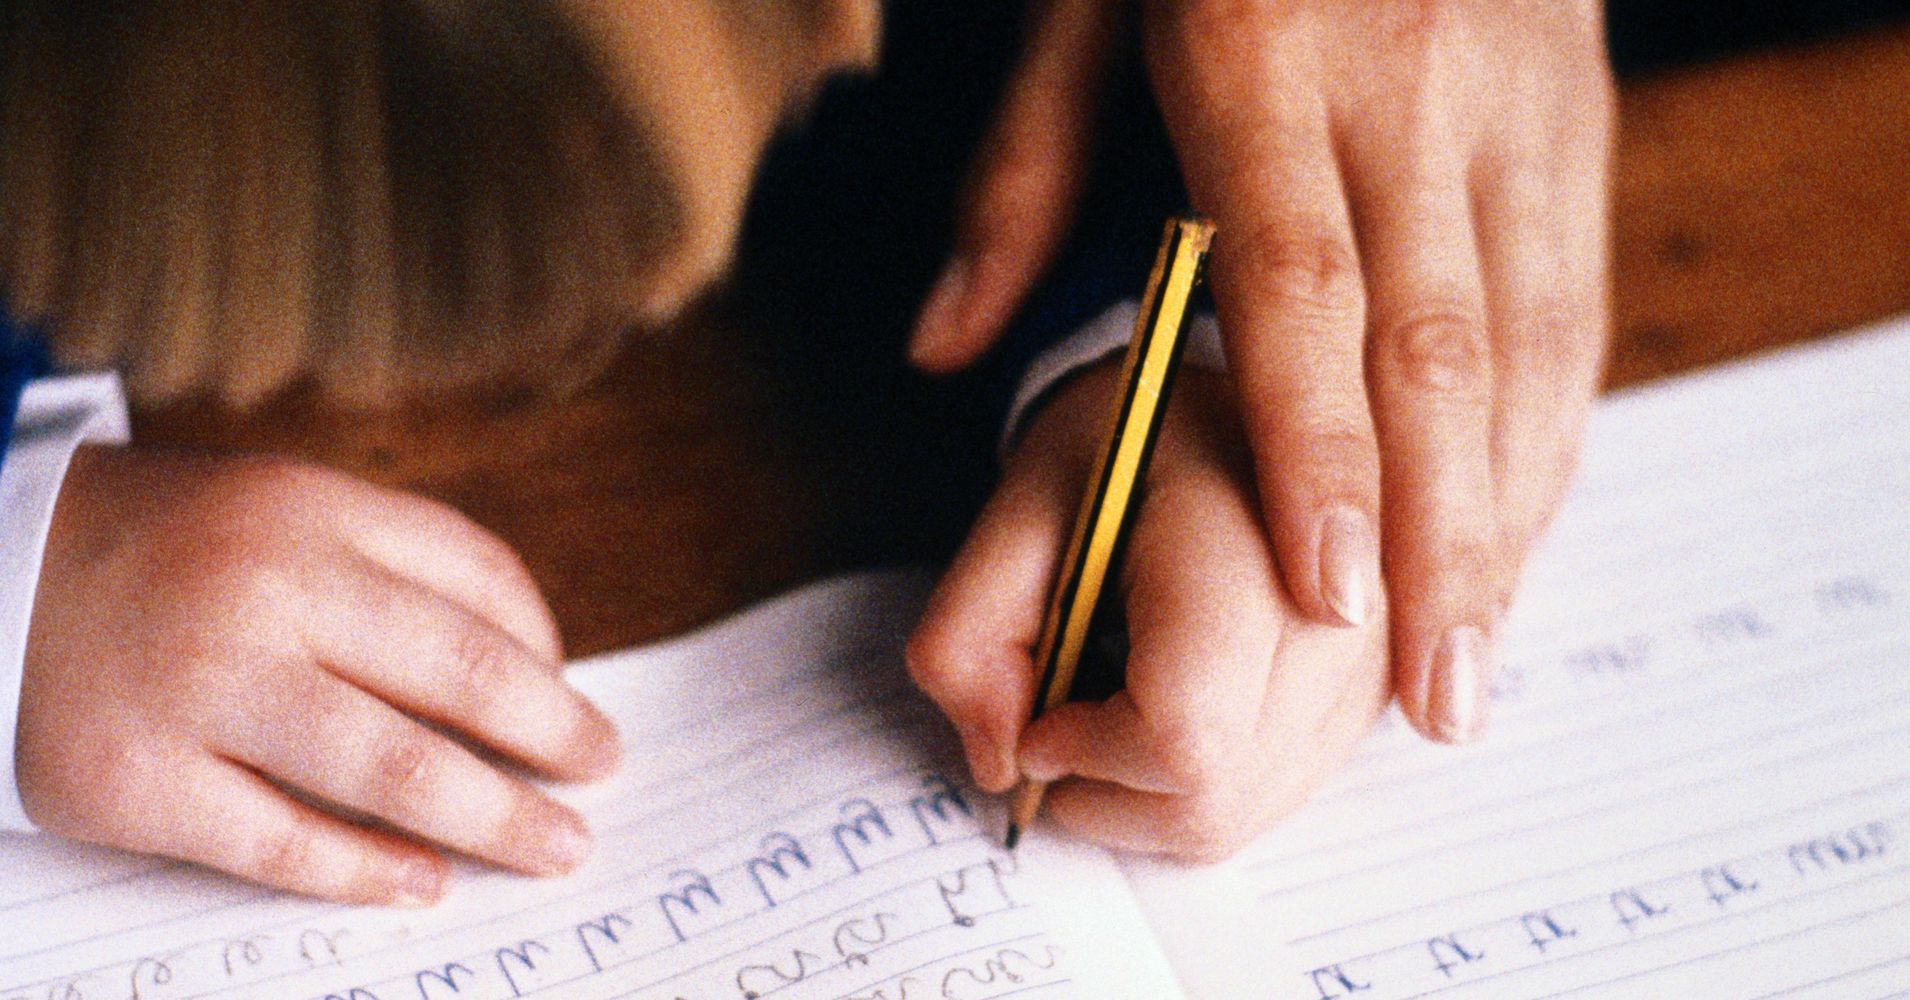 antiquated-or-integral-ohio-students-may-soon-have-to-learn-cursive-huffpost